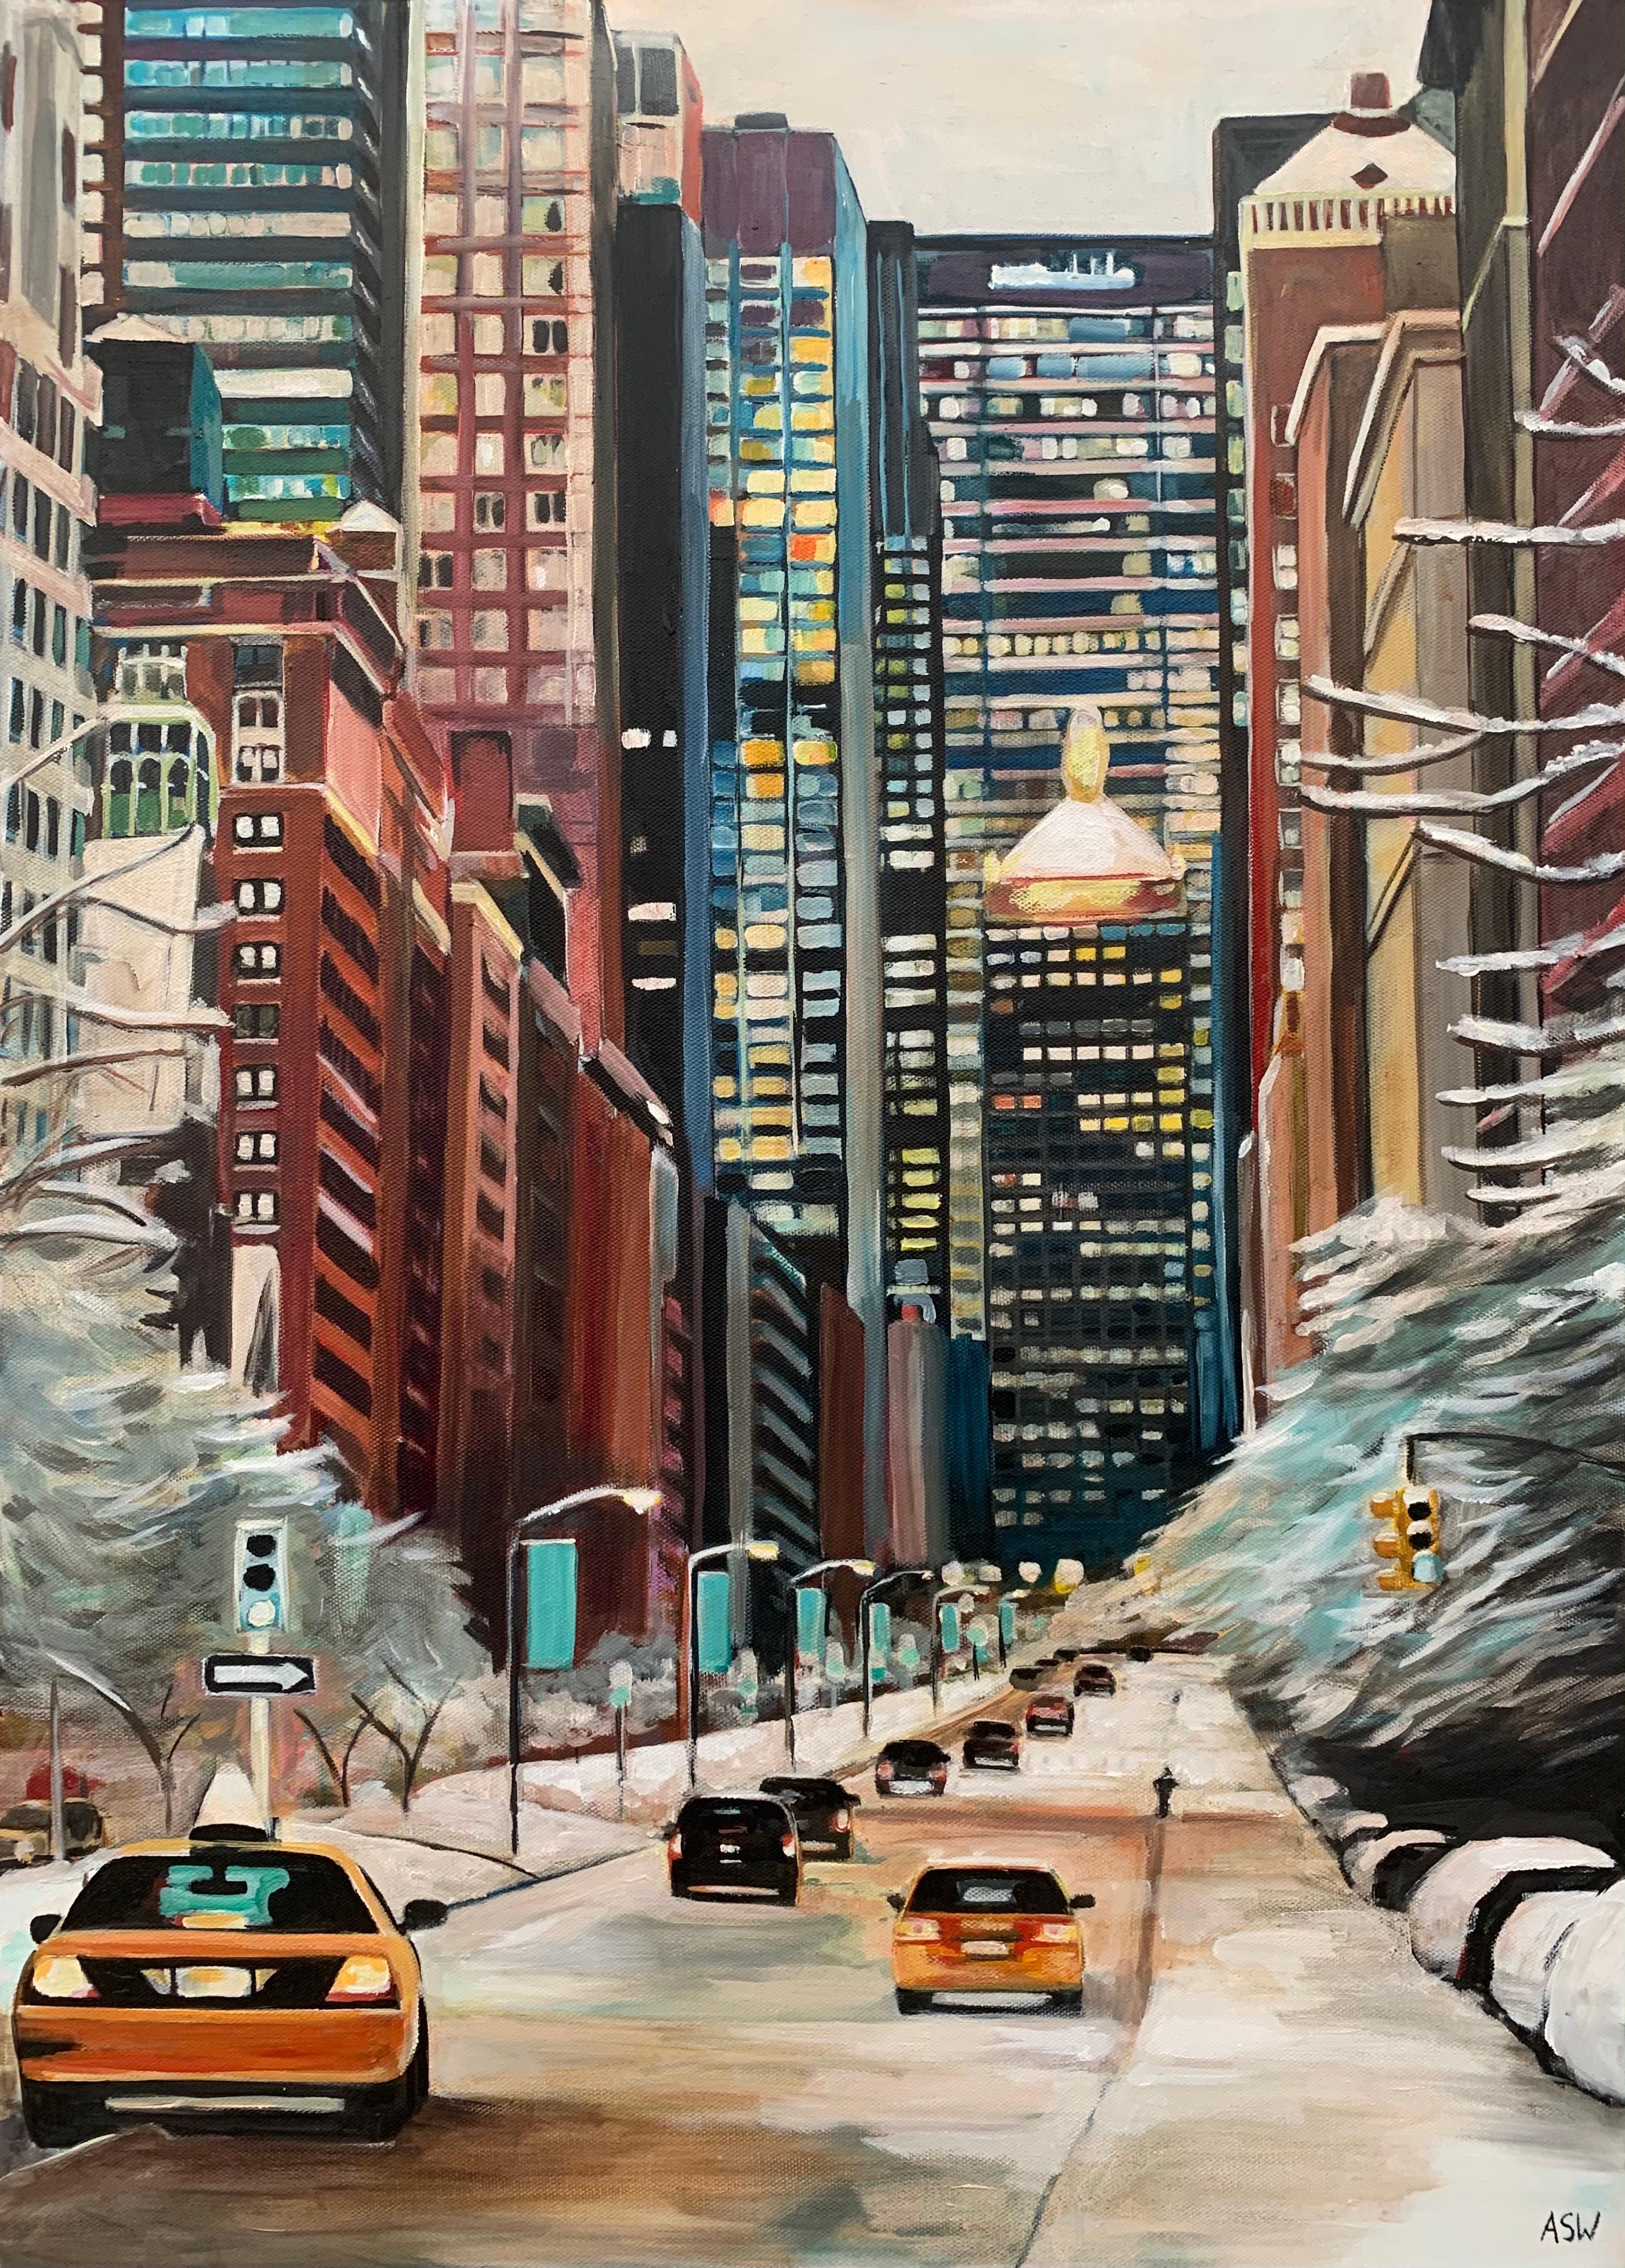 Painting of New York City Taxis in Winter Snow by Contemporary British Artist - Brown Landscape Painting by Angela Wakefield